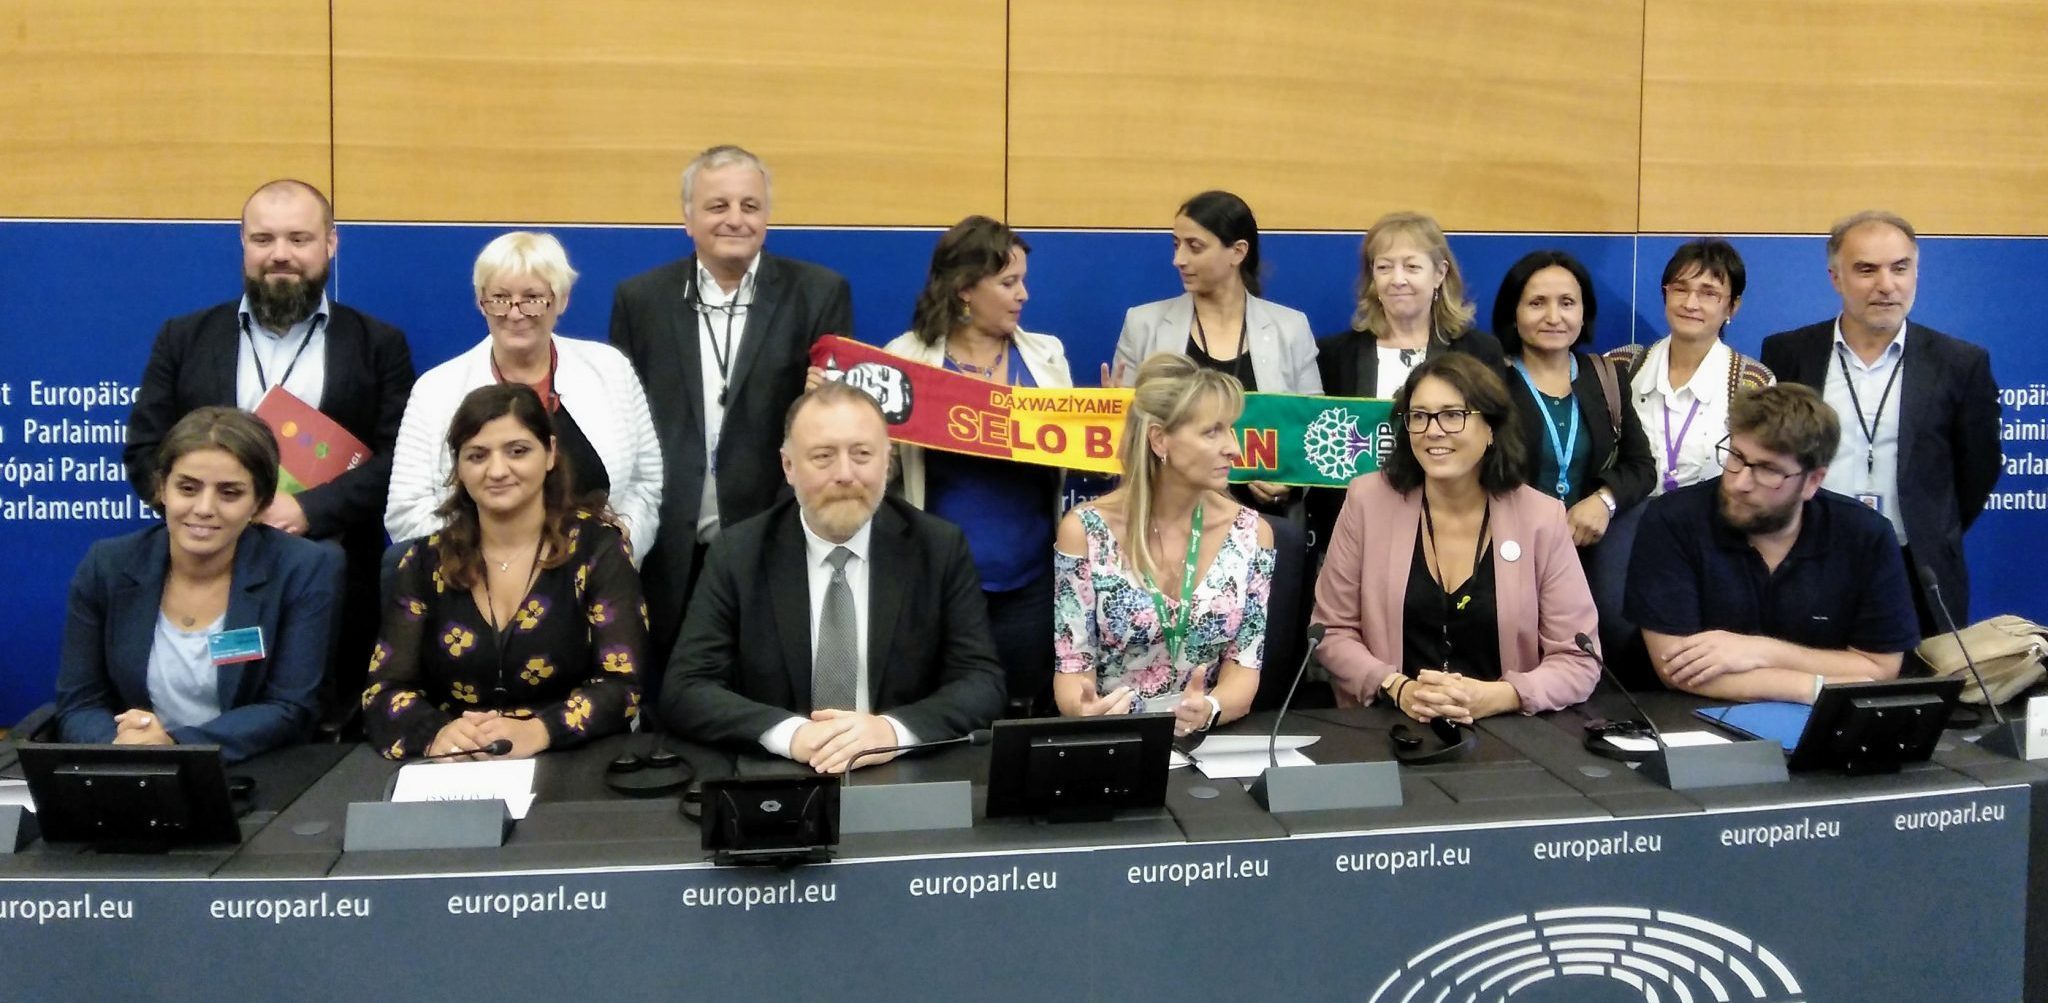 EFA promotes a Kurdistan Friendship Group and calls on the EU to act in the defence of democracy in Turkey